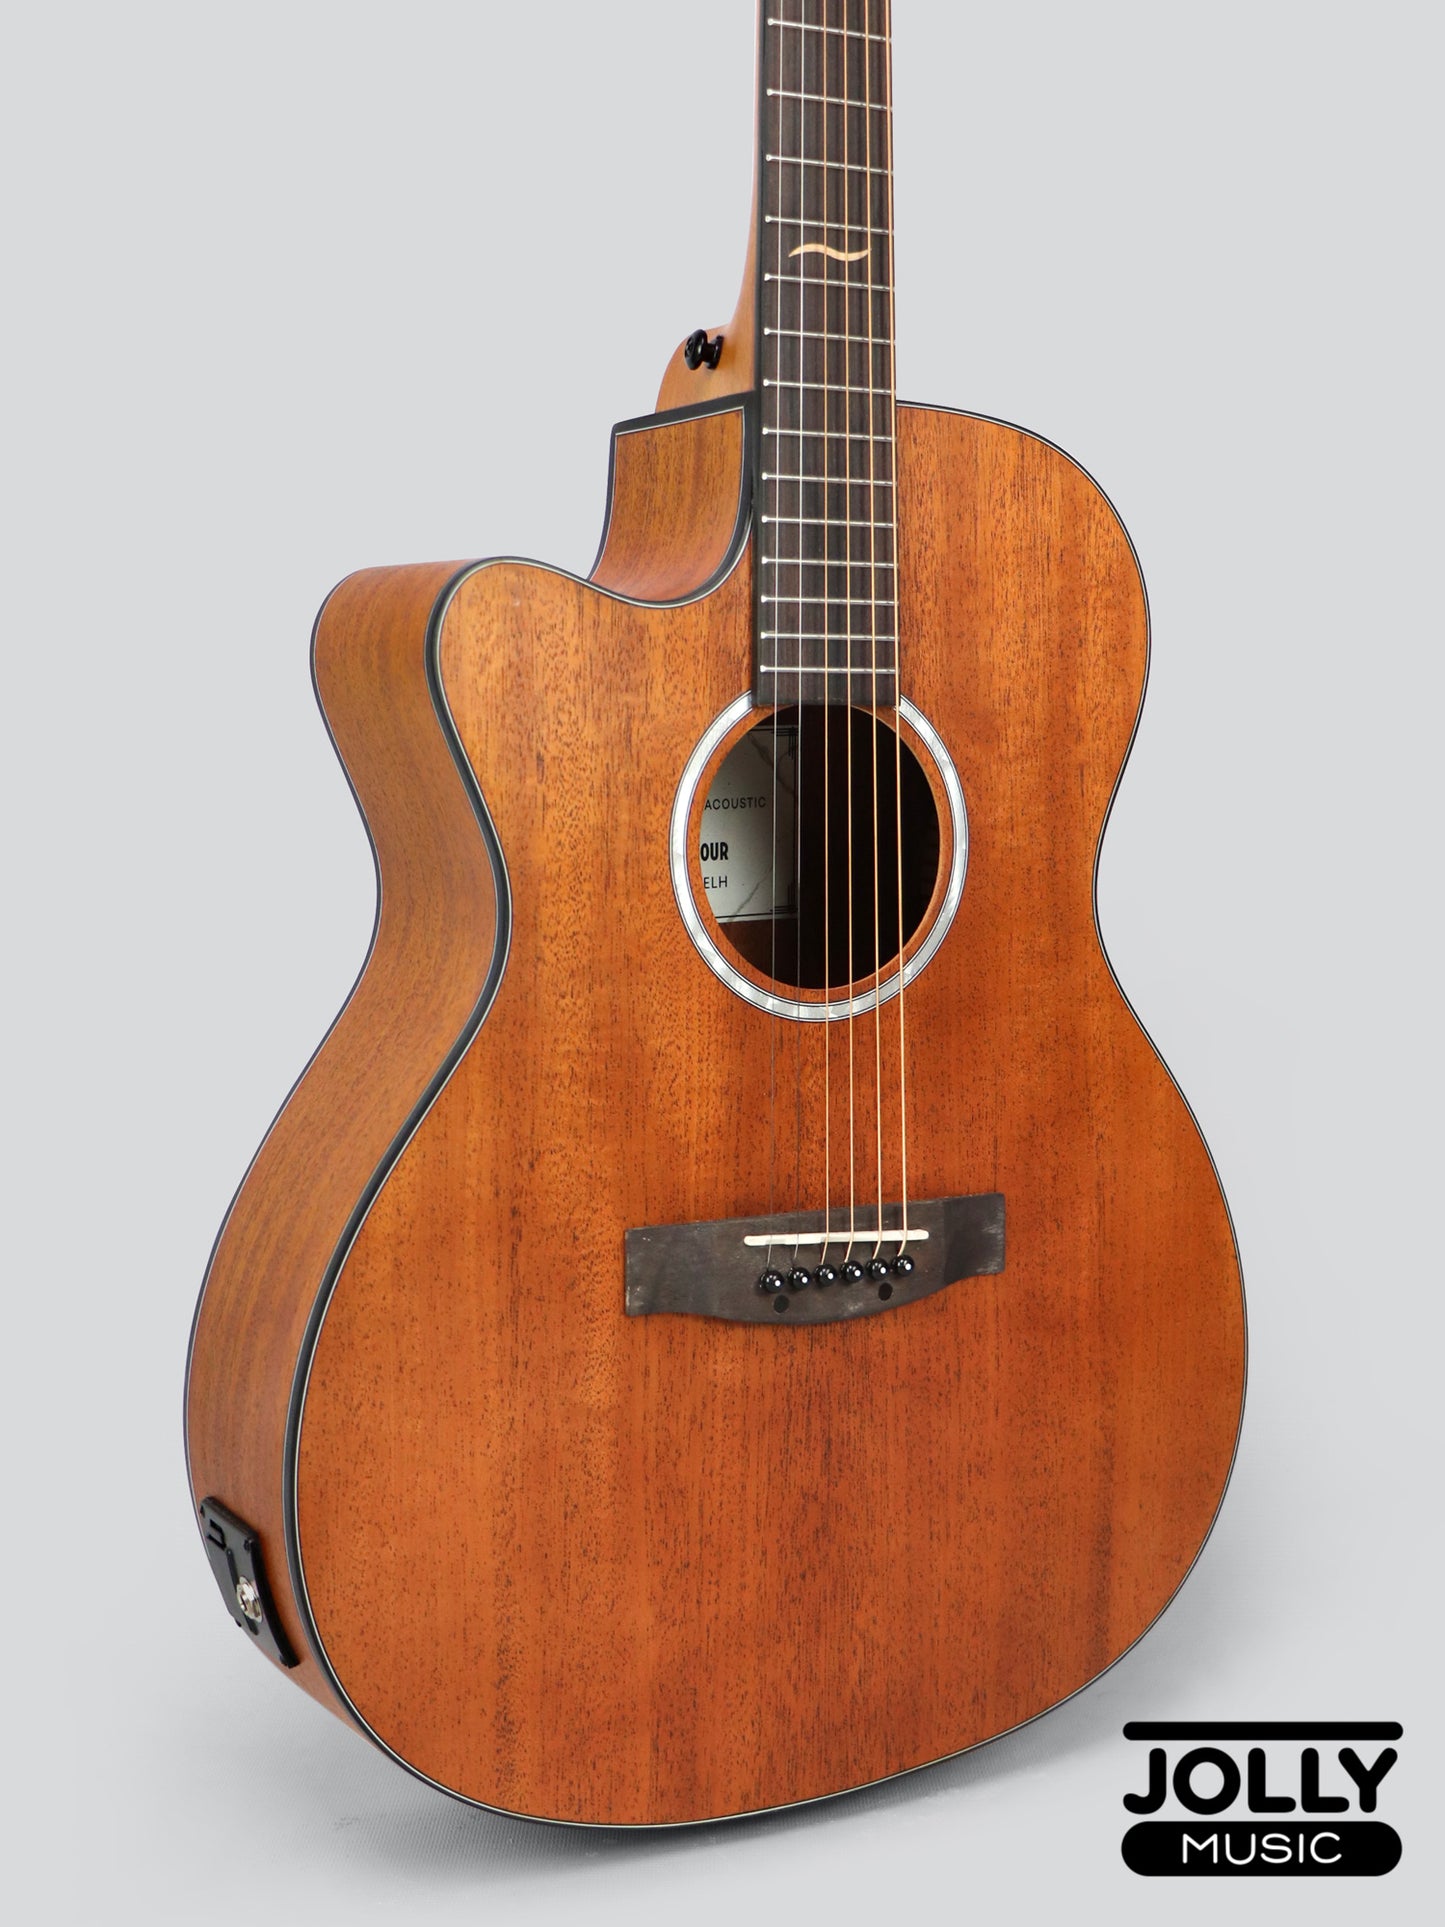 JCraft Troubadour TM-15CE LH LEFT HAND Orchestra All-Mahogany Acoustic-Electric Guitar with soft case